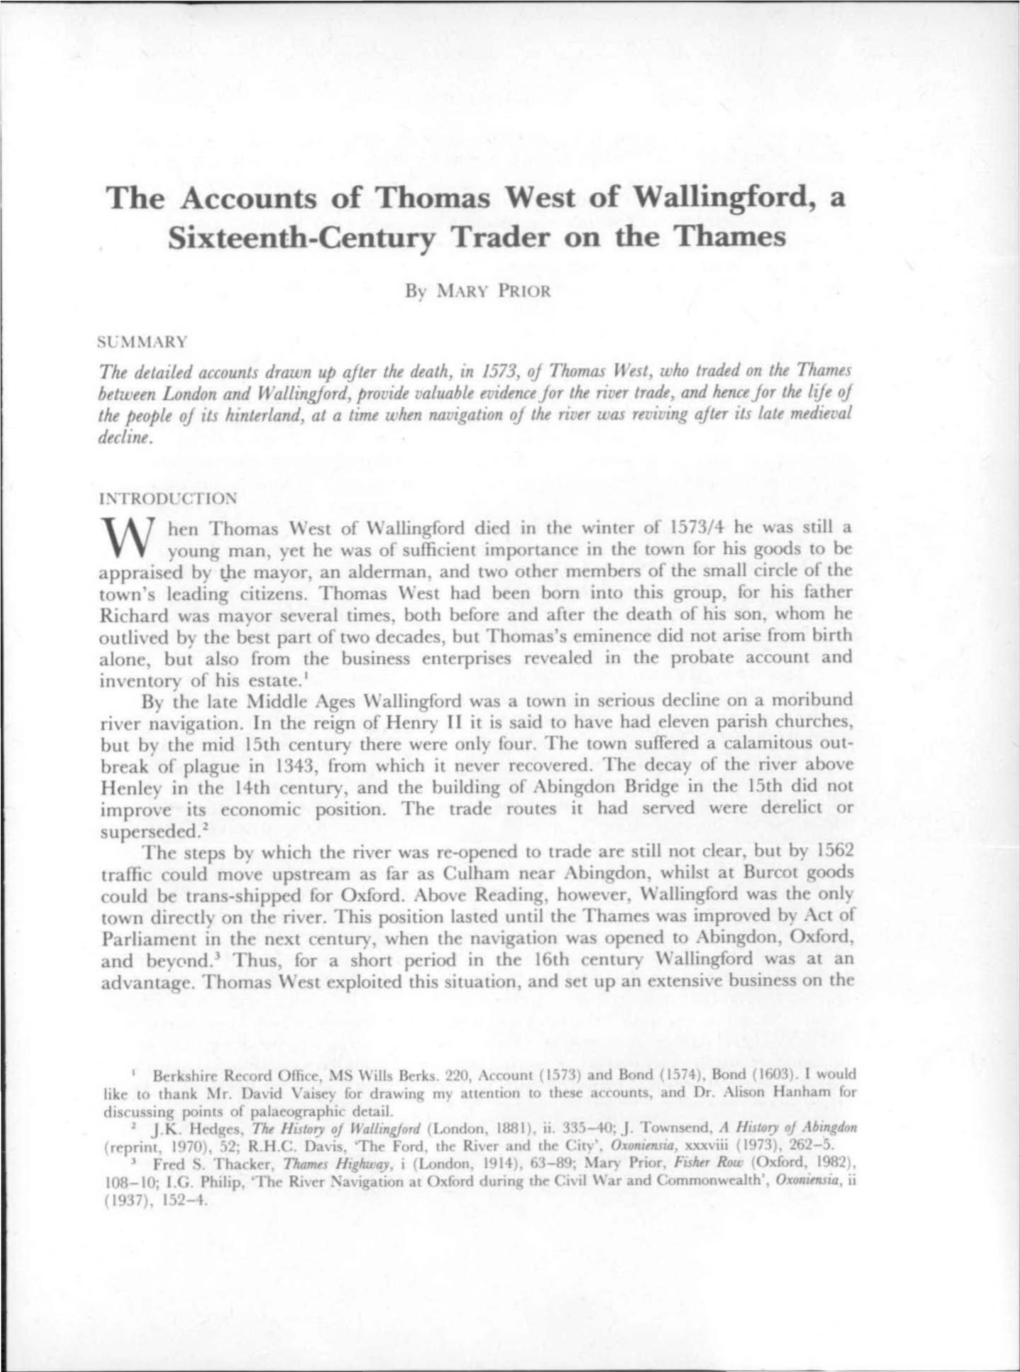 The Accounts of Thomas West of Wallingford, a Sixteenth-Century Trader on the Thames